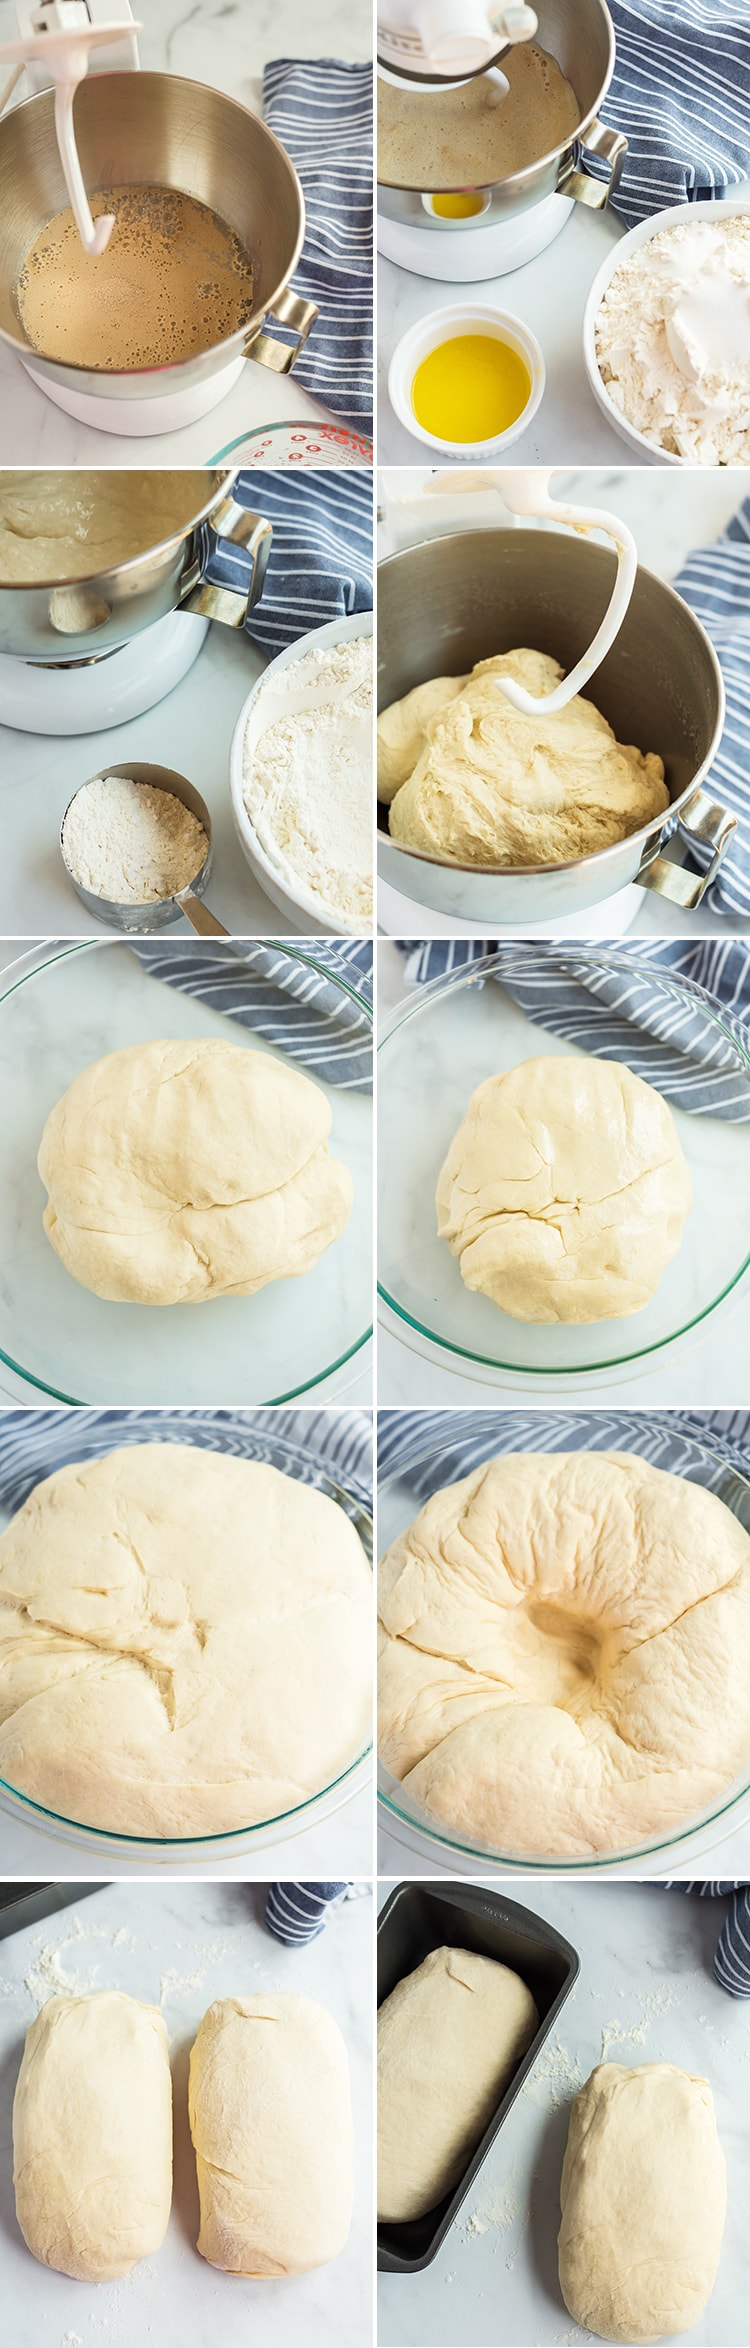 Step by step photos on how to make white bread